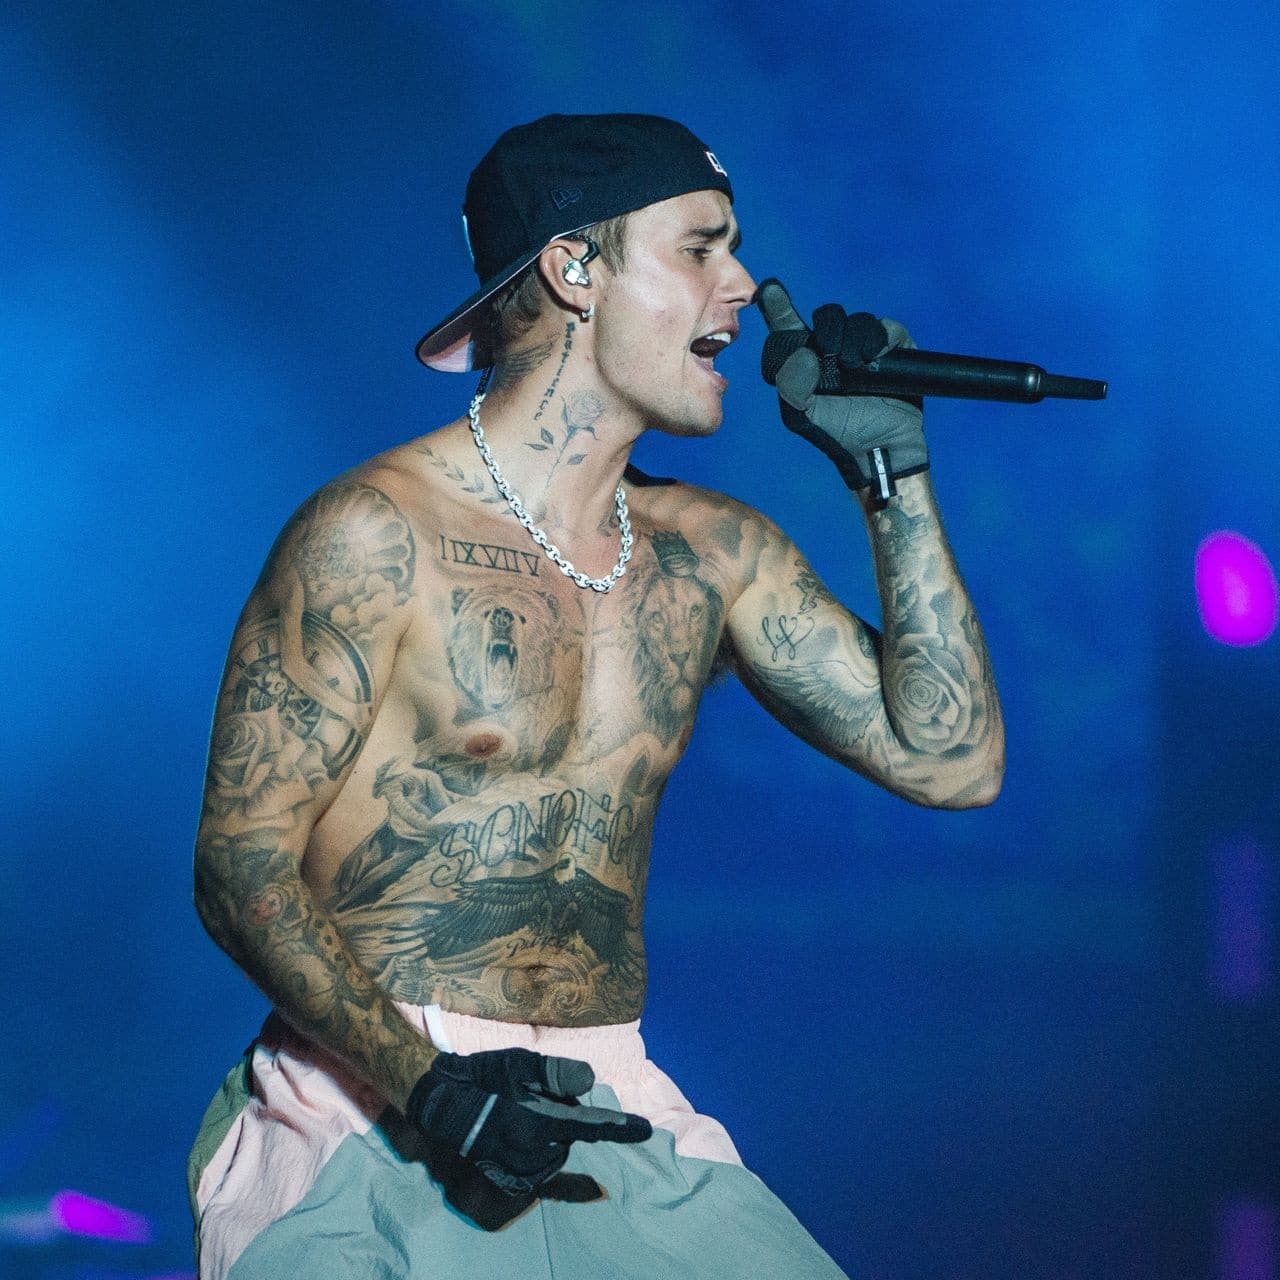 Justin Bieber sells his entire 15-year song collection for $200 million